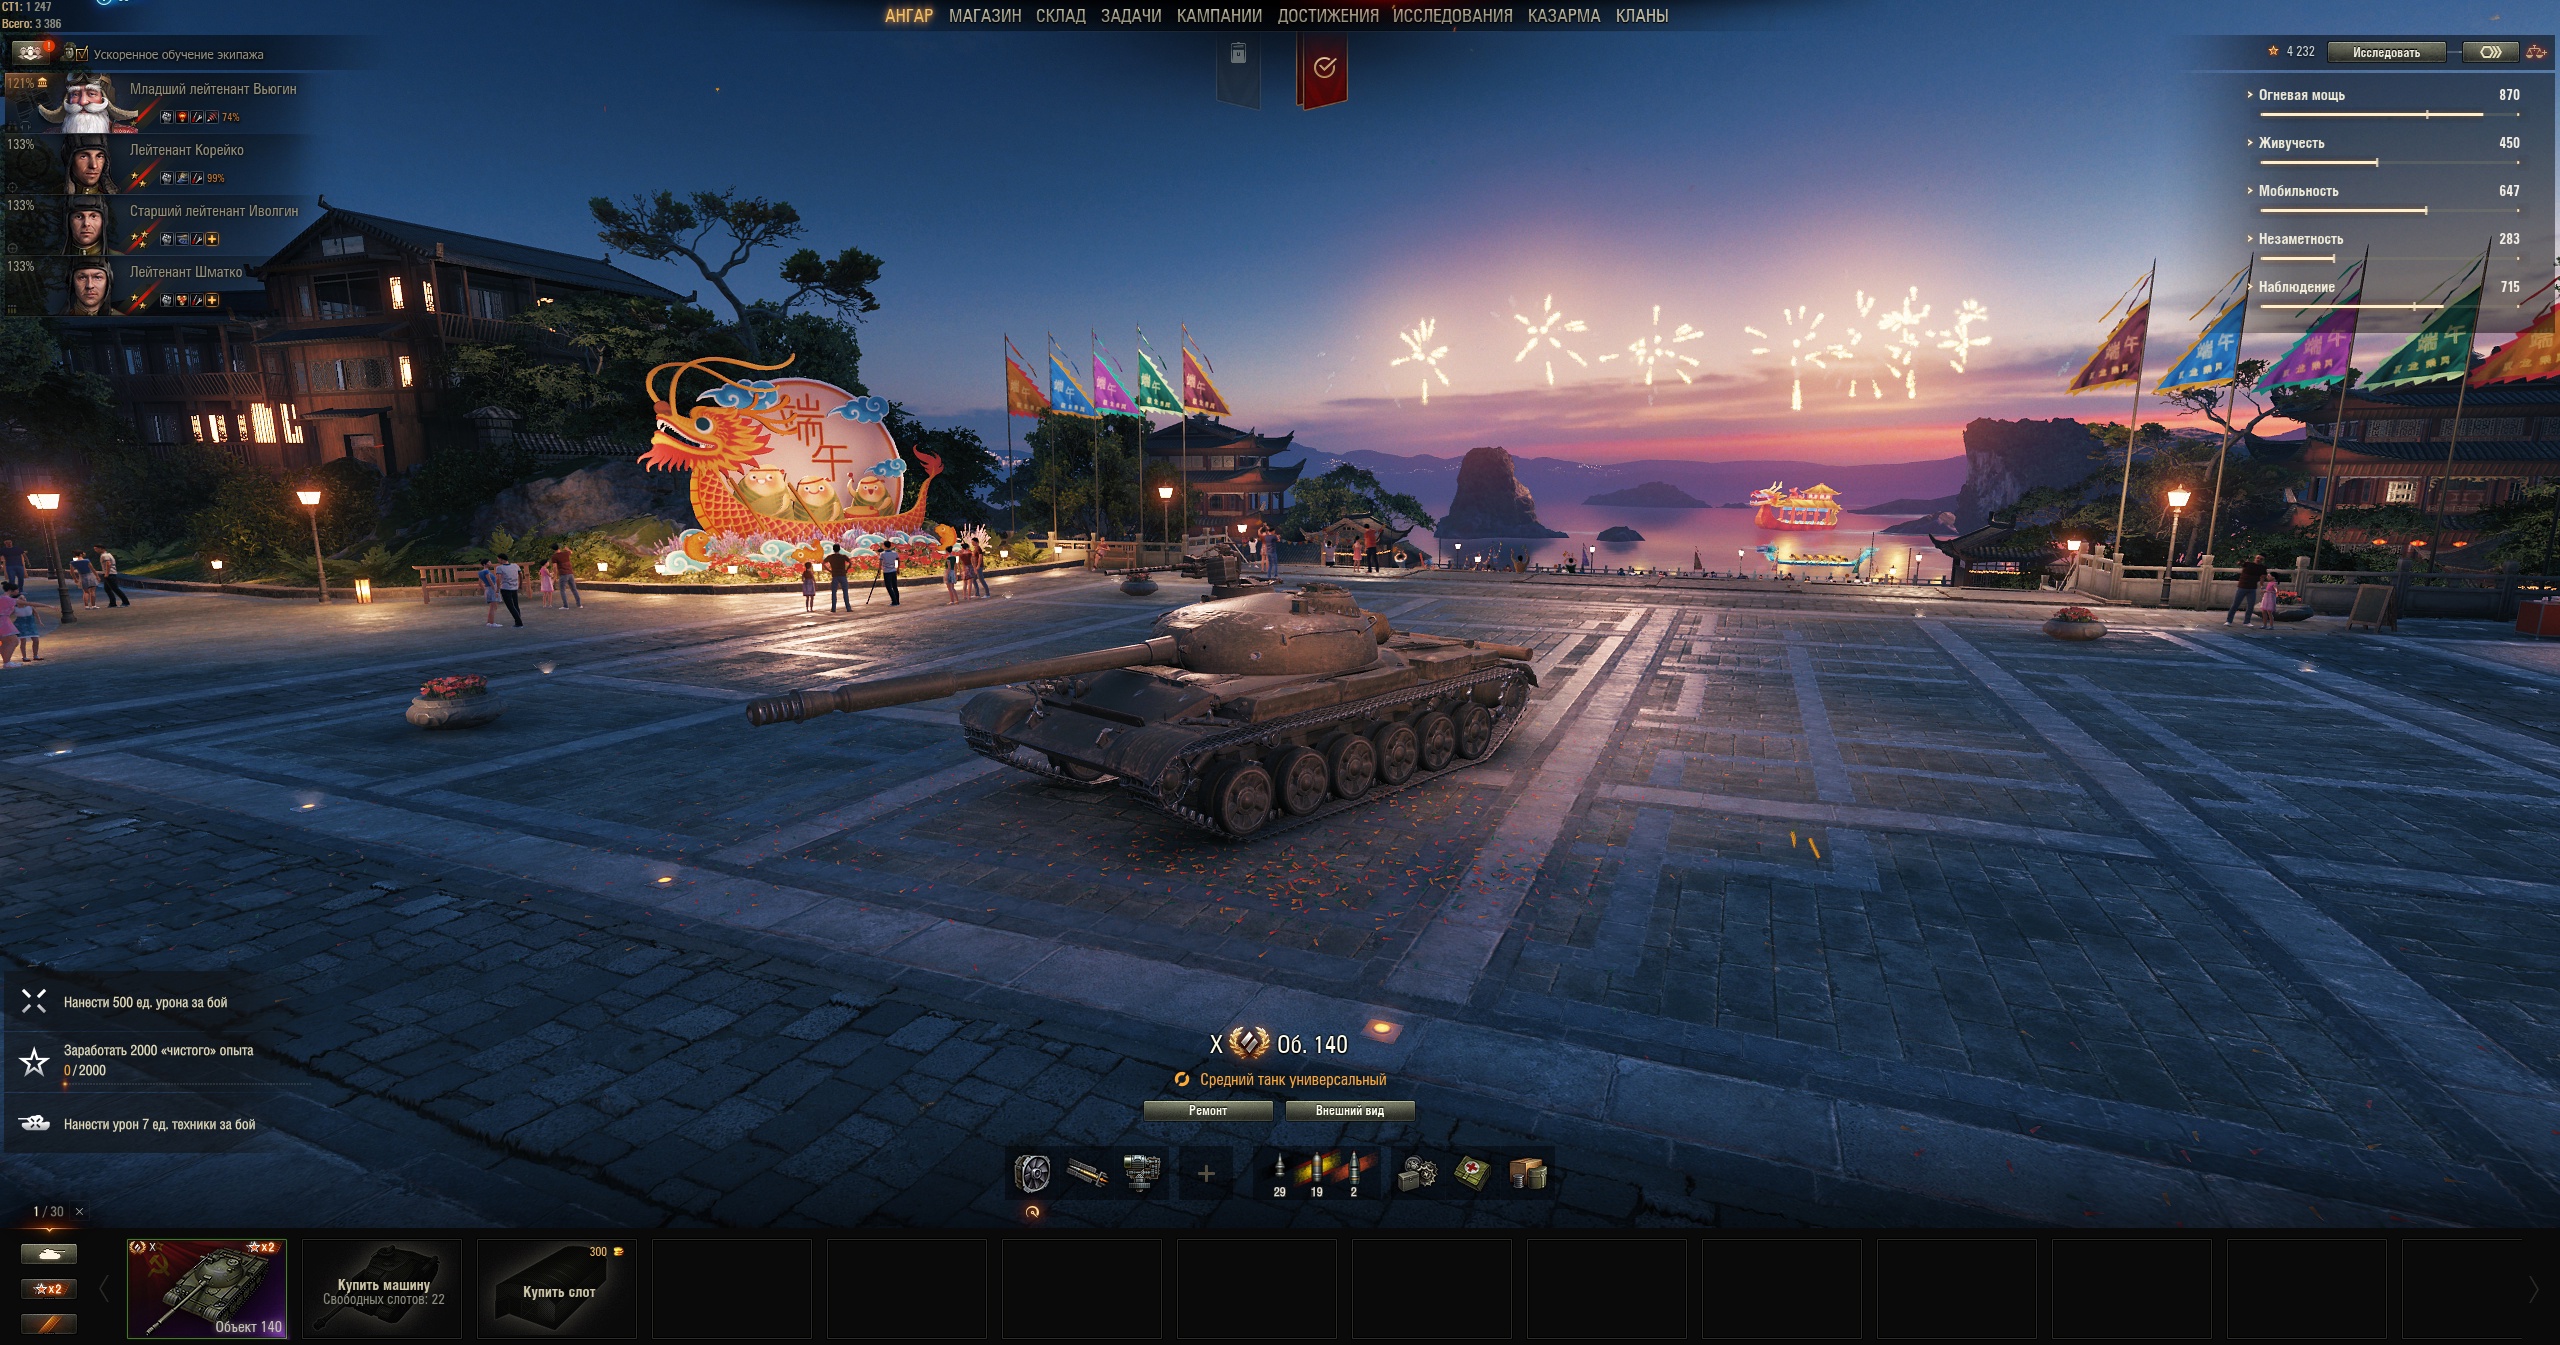 WoT CN: New Hangar For The Dragon Boat Race Event - The Armored Patrol